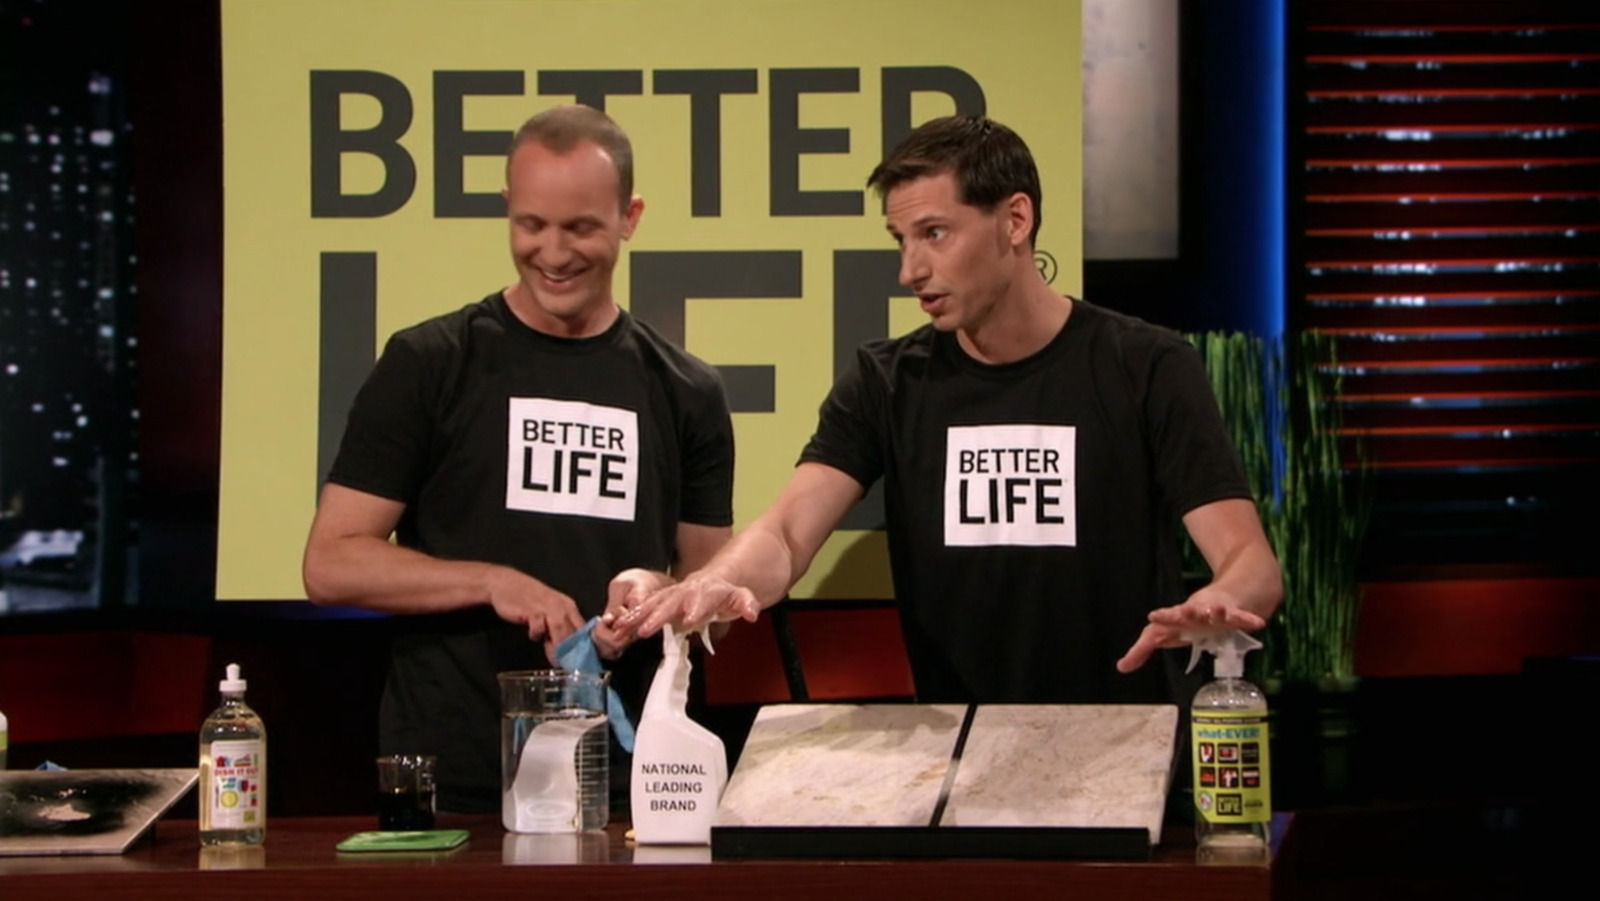 Whatever Happened To Better Life Cleaning Products After Shark Tank Season  5?